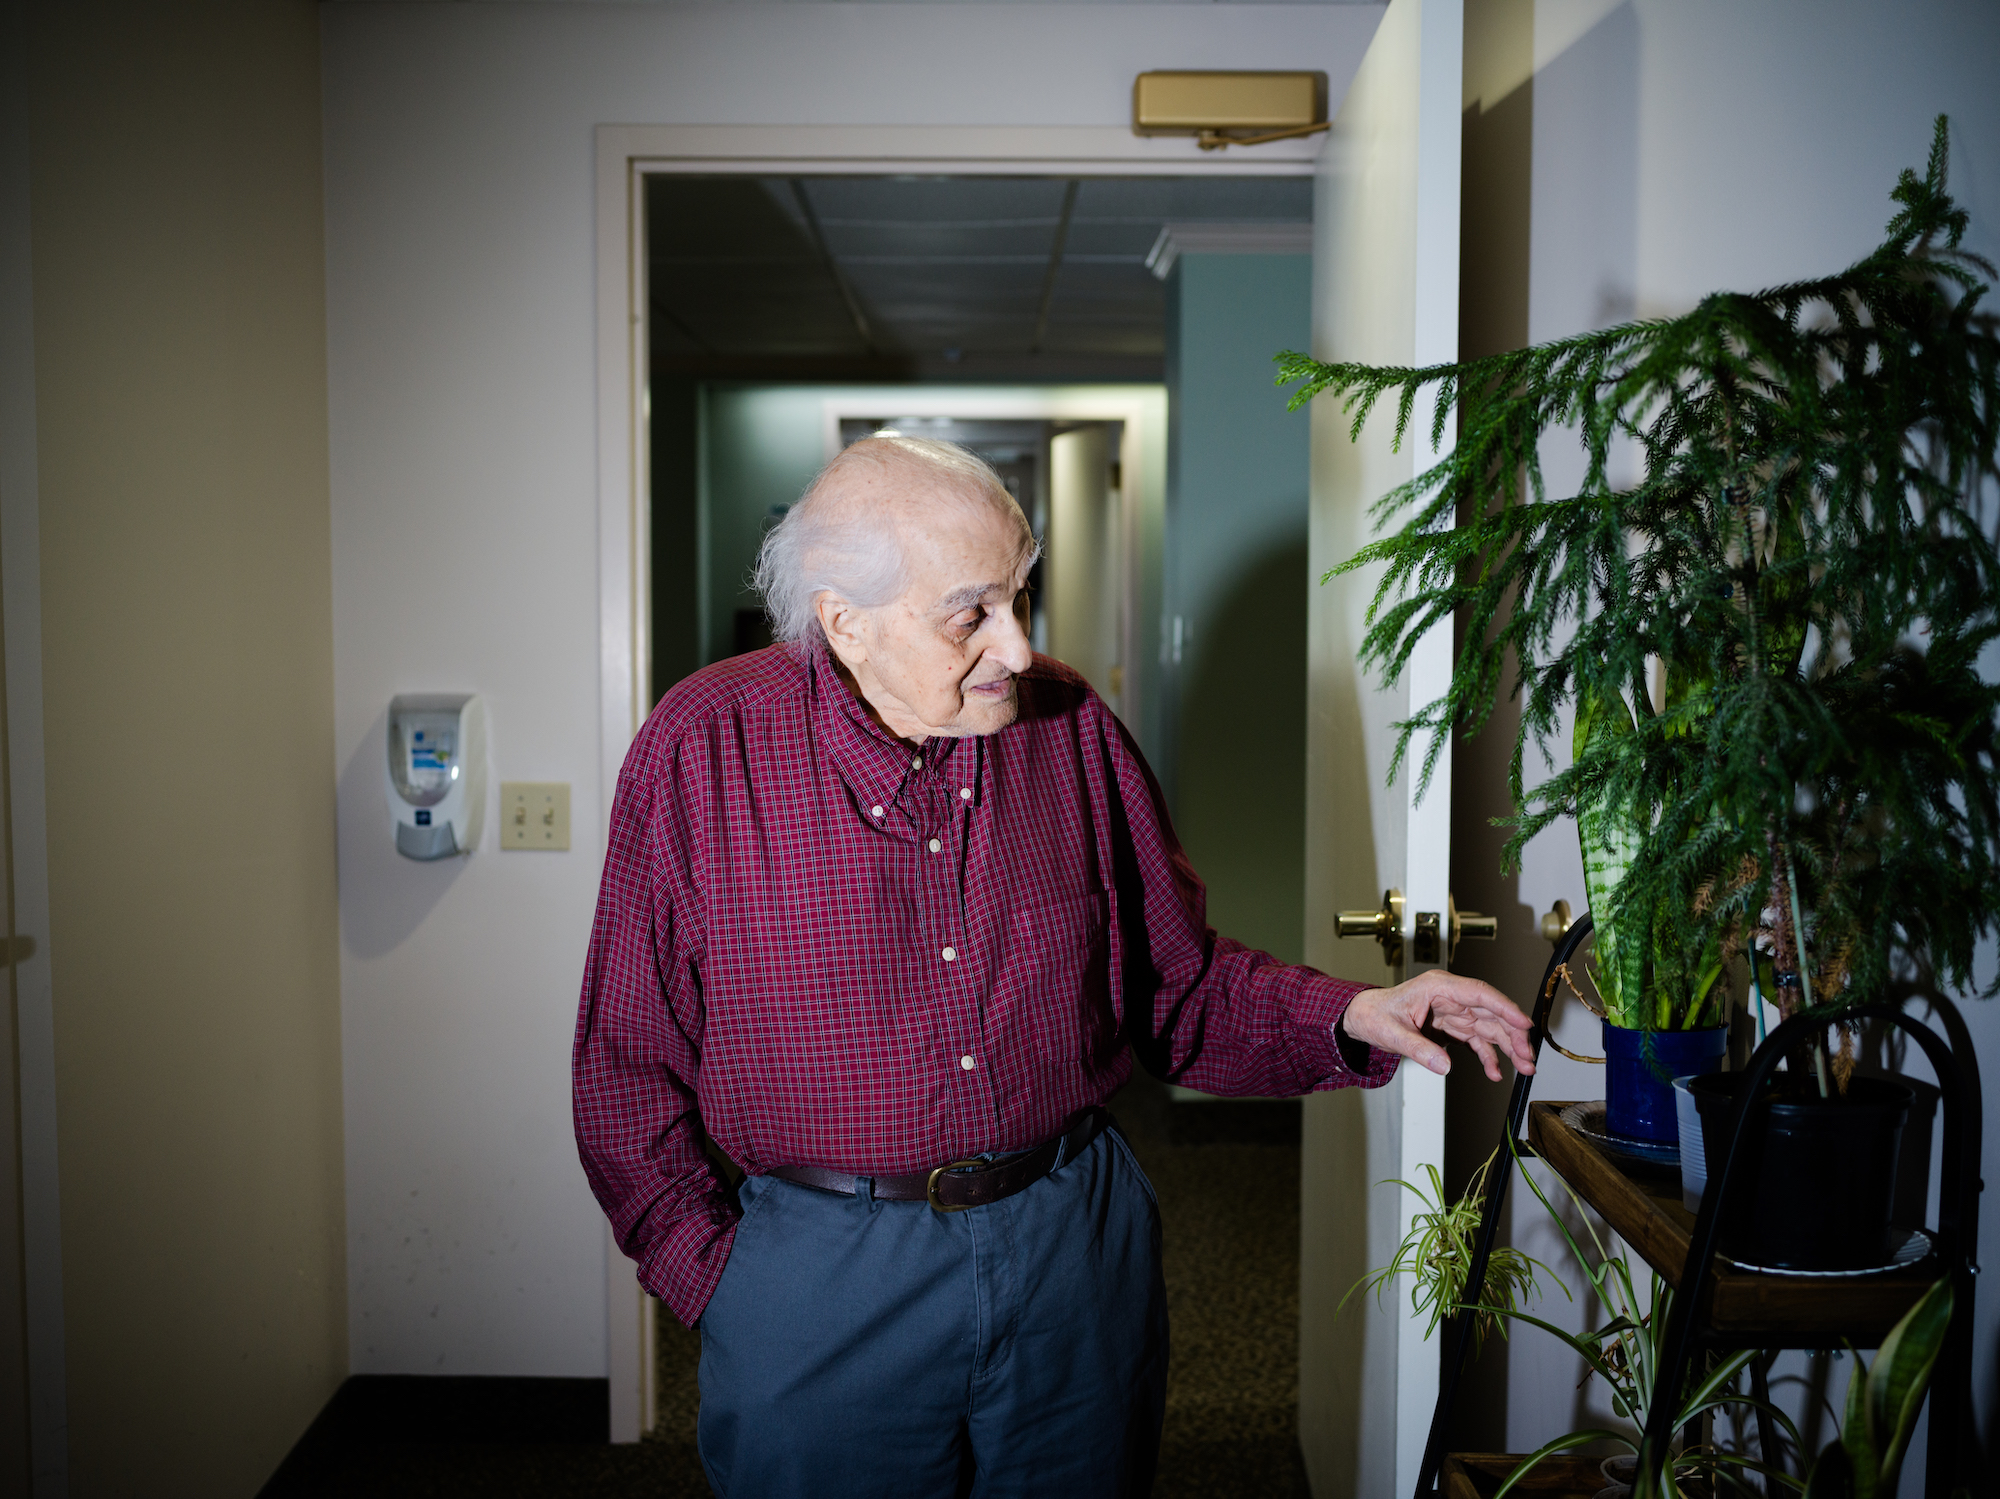 An old man in a red button-down shirt looks lovingly at and reaches his hand toward a bookshelf with bright green plants.